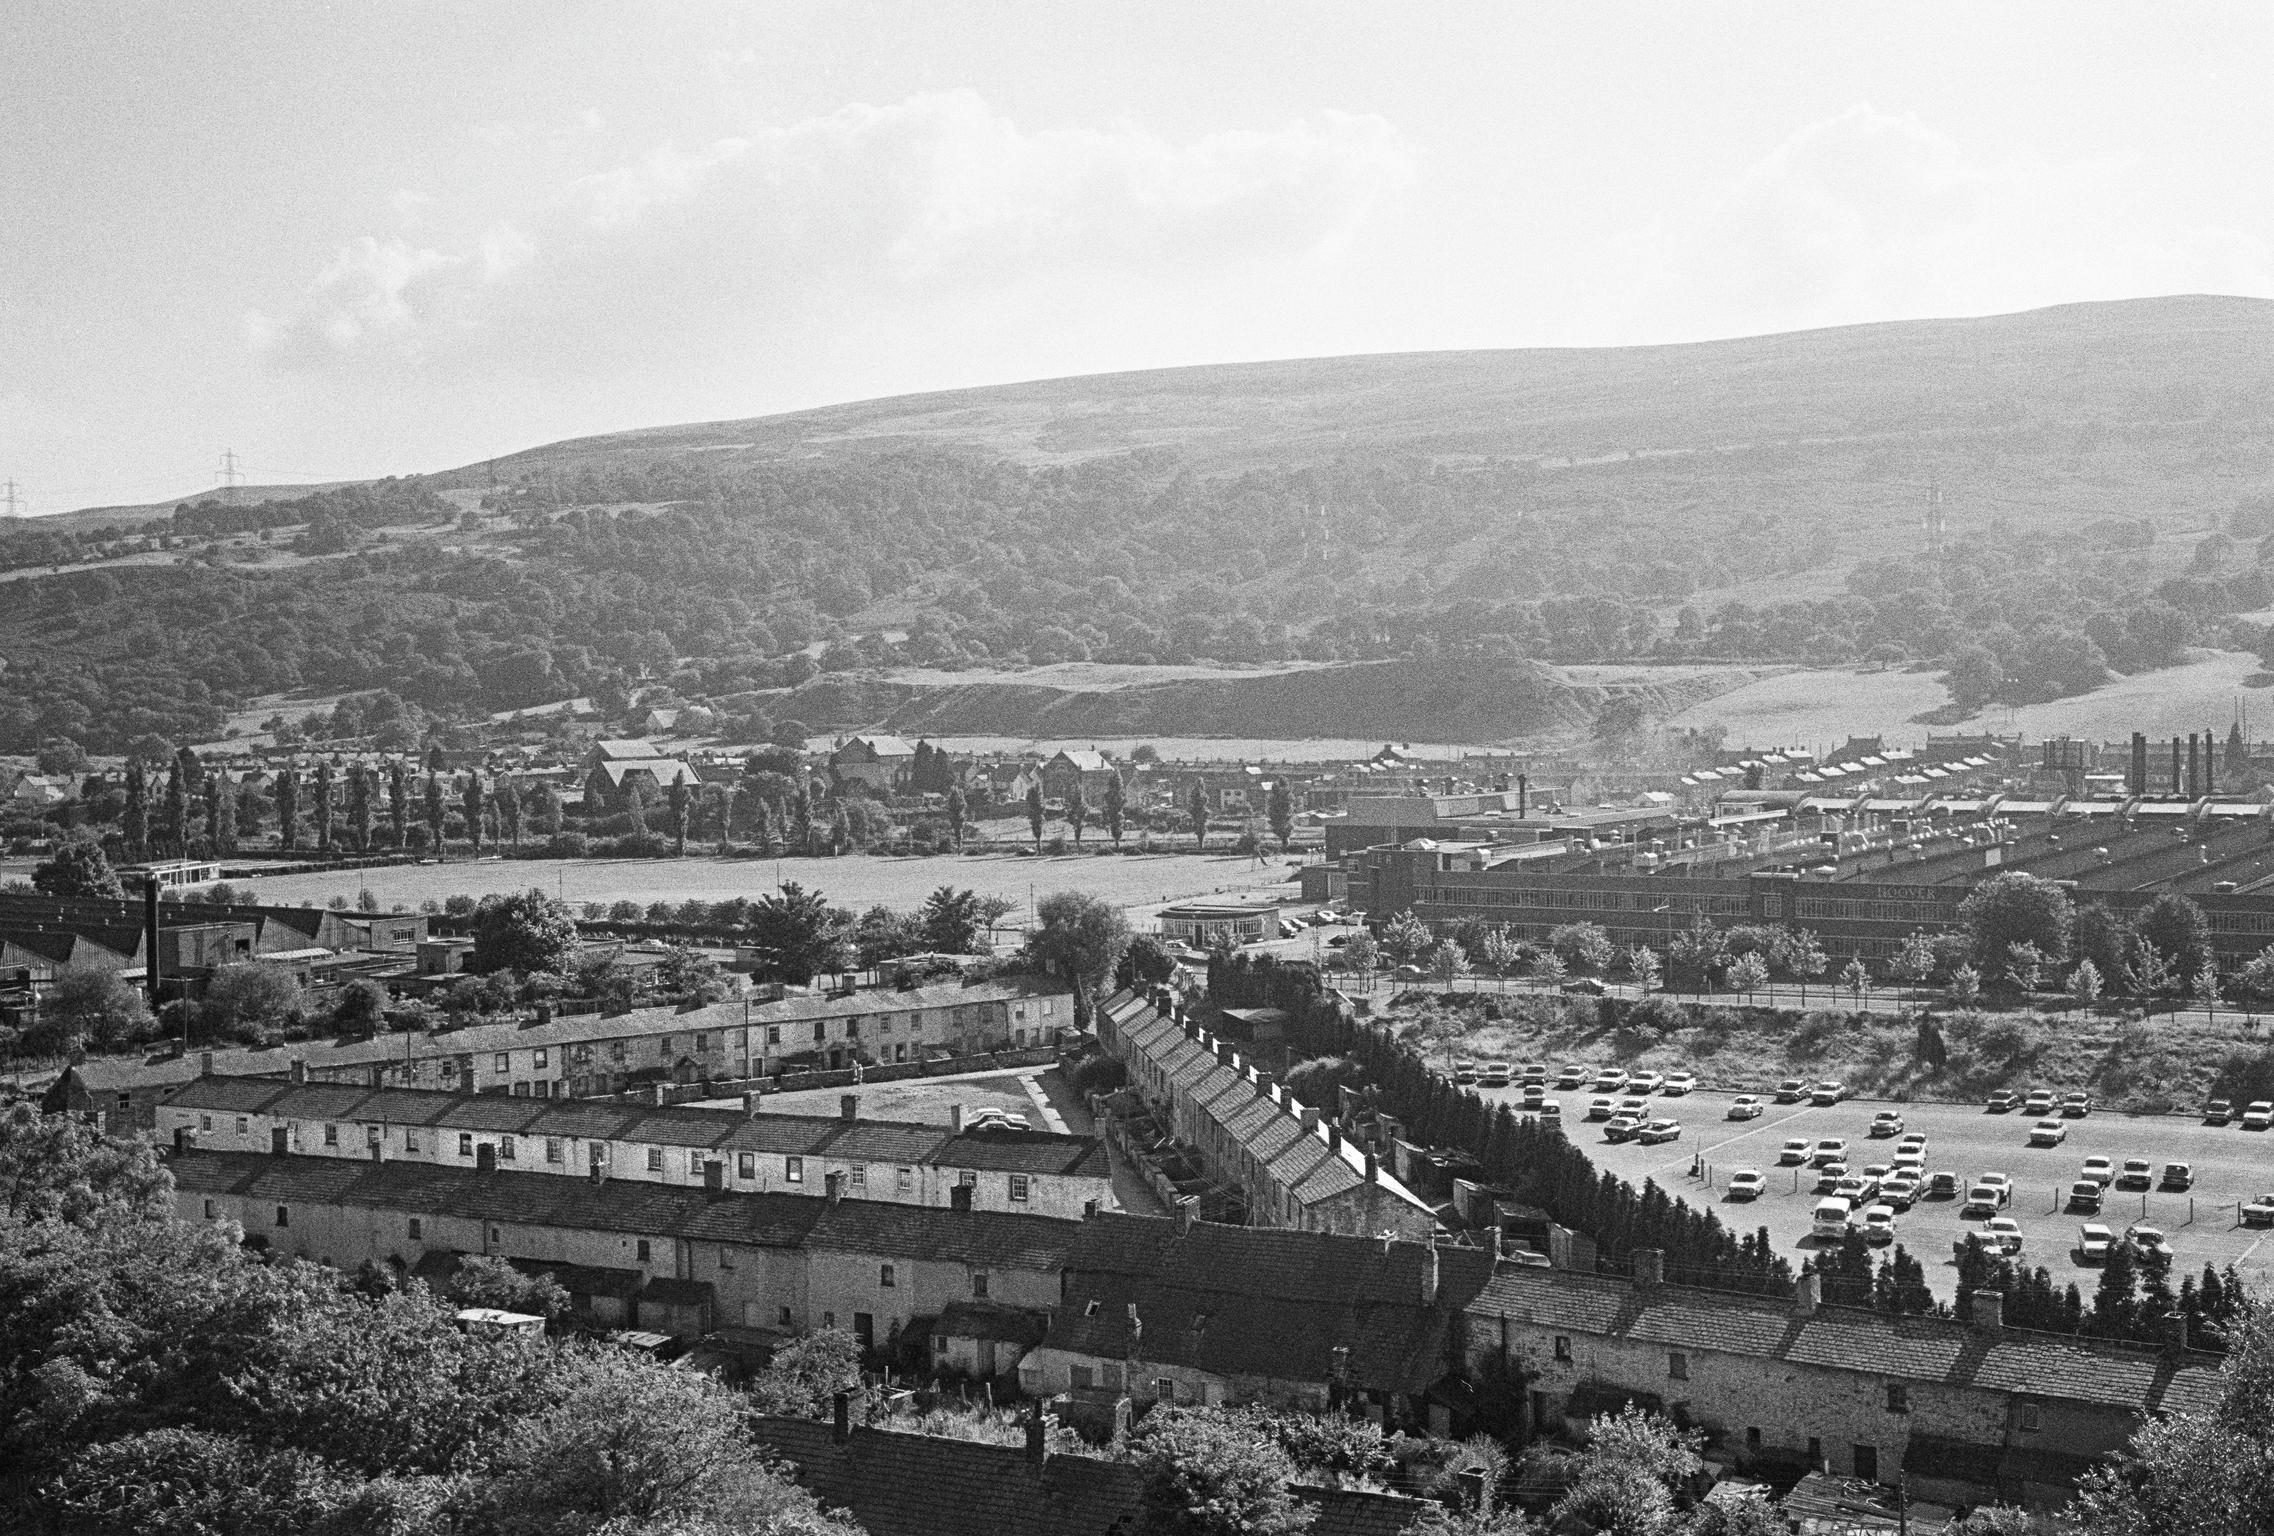 Early industrial revolution houses in the Triangle, Pentrebach. Merthyr Tydfil, Wales